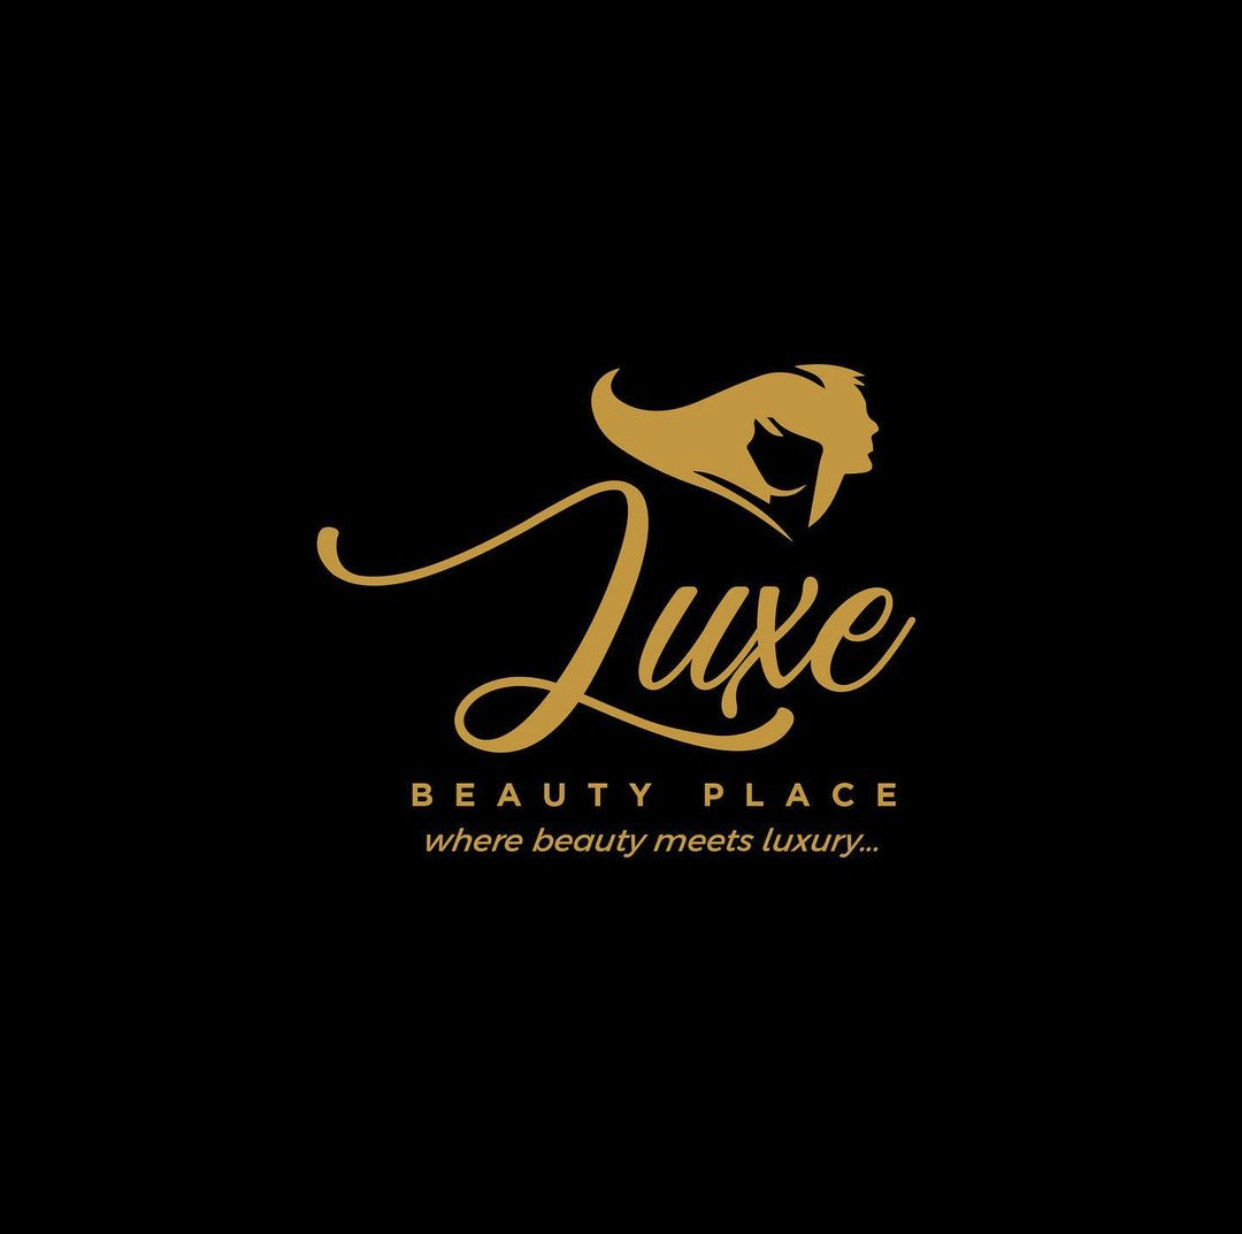 Luxe Beauty Place